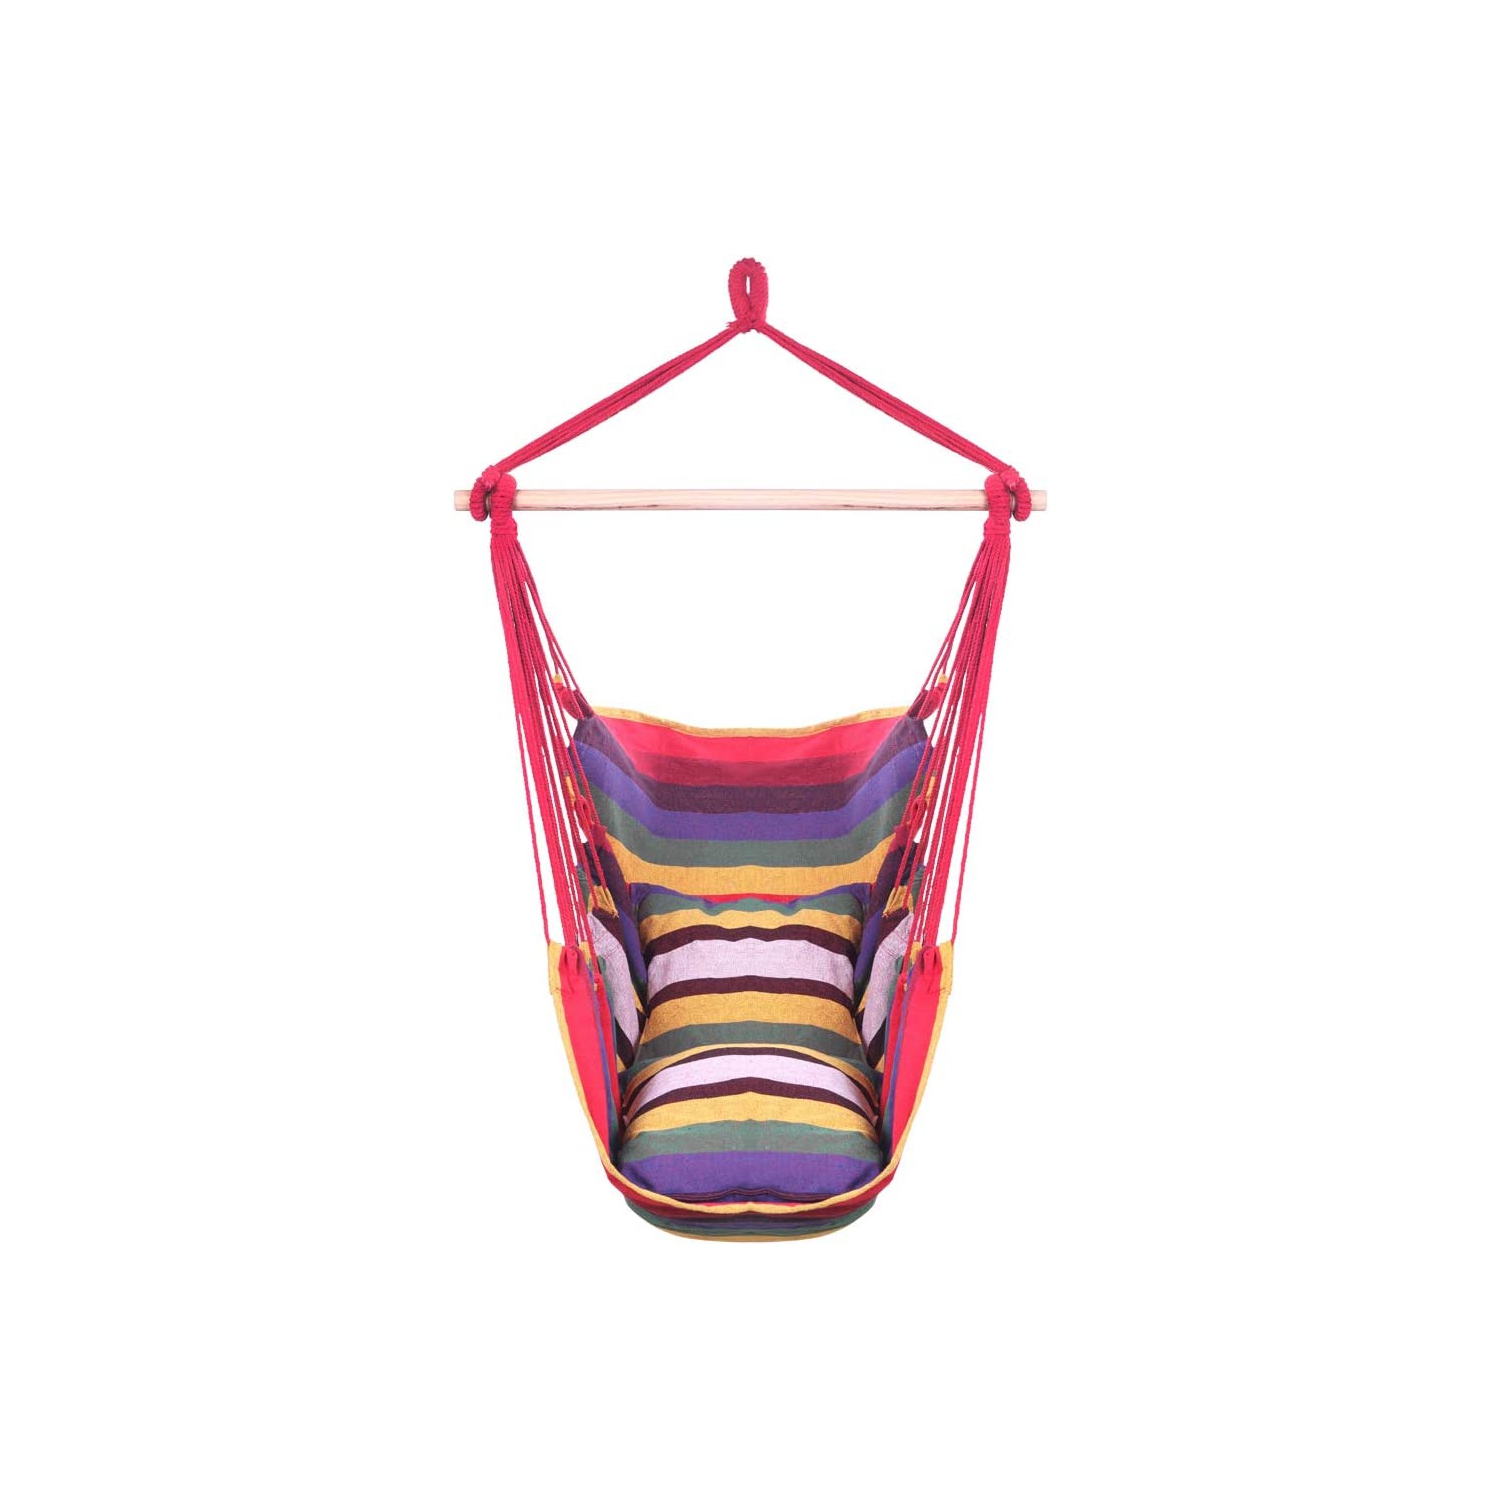 Hammock Hanging Chair Standing Hanging Chair Seats Max 113kg 2 Cushions Included Steel Spreader Bar with Non-Slip Rings